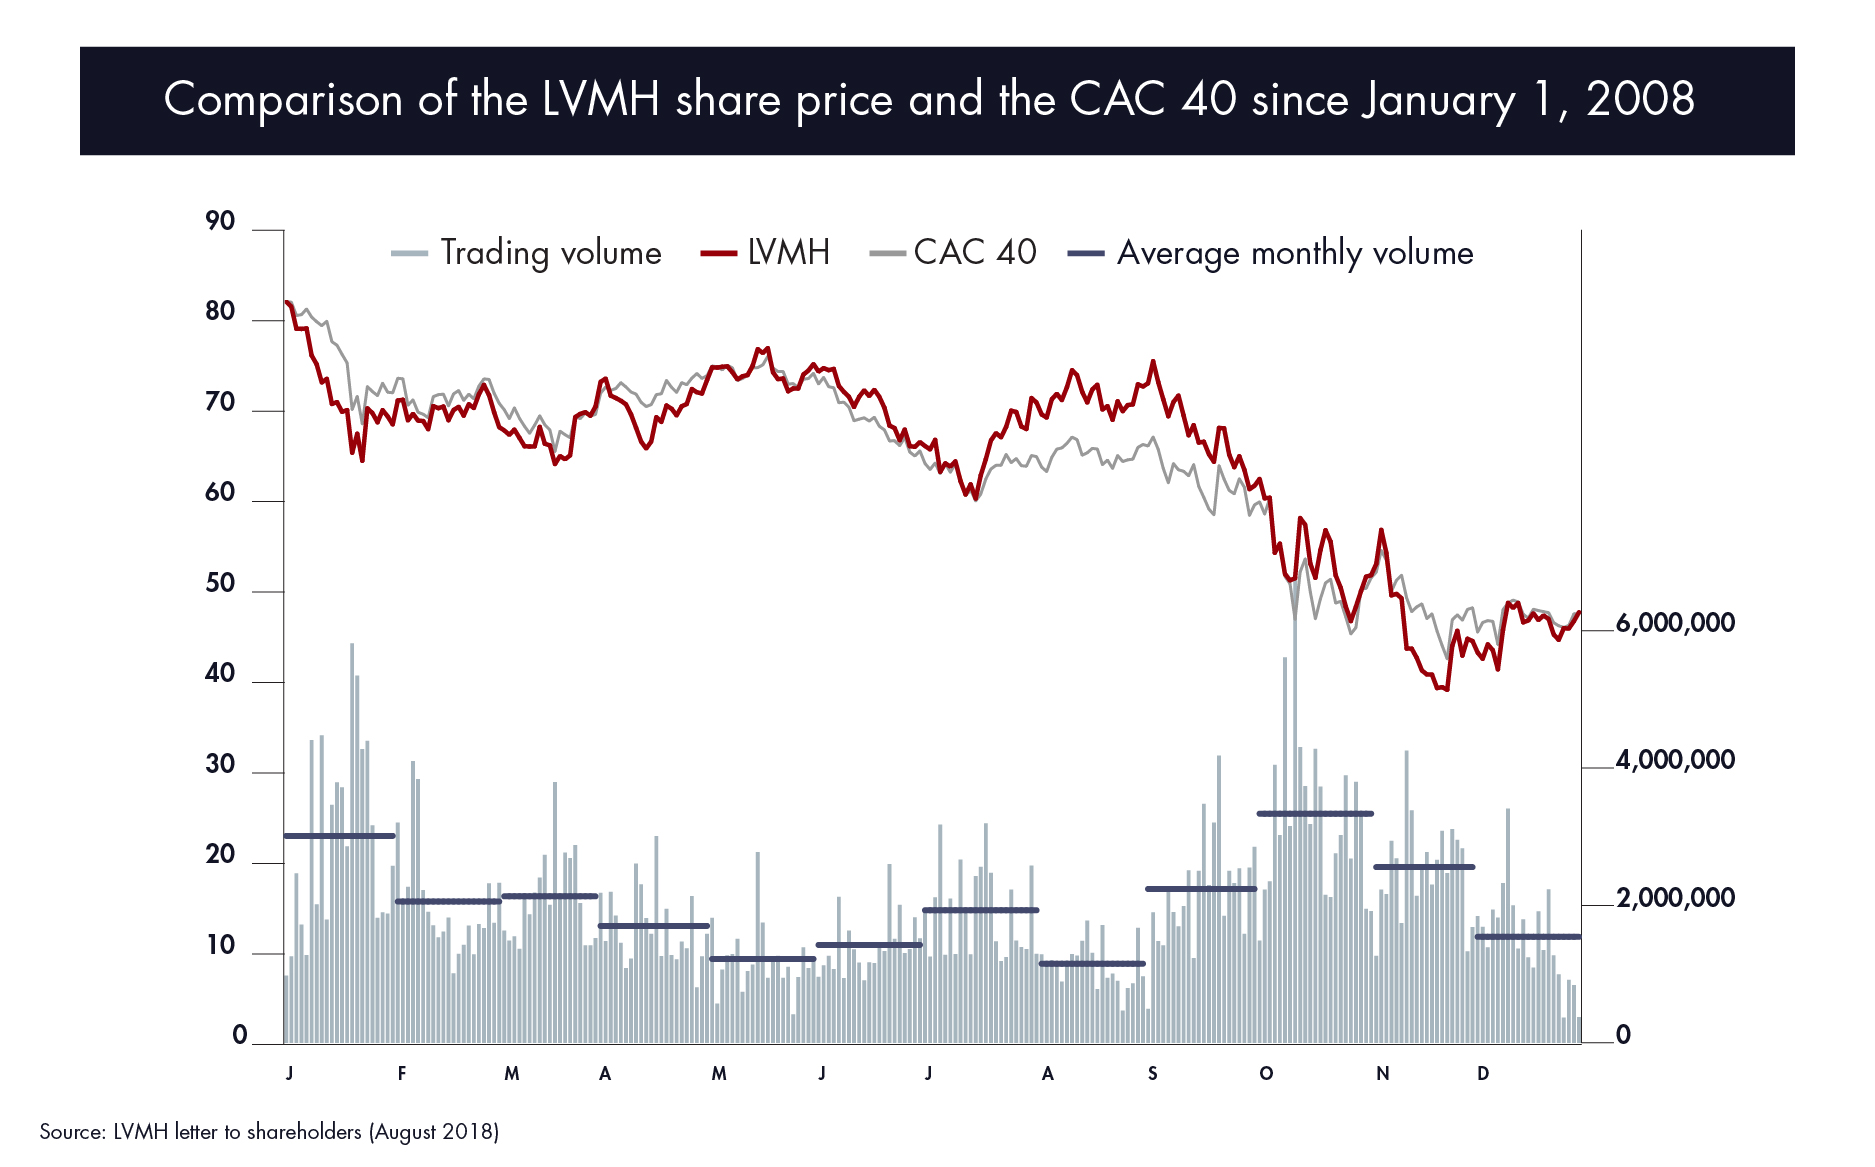 CAC 40: LVMH's First-Half Earnings Came With Slower U.S. Growth 